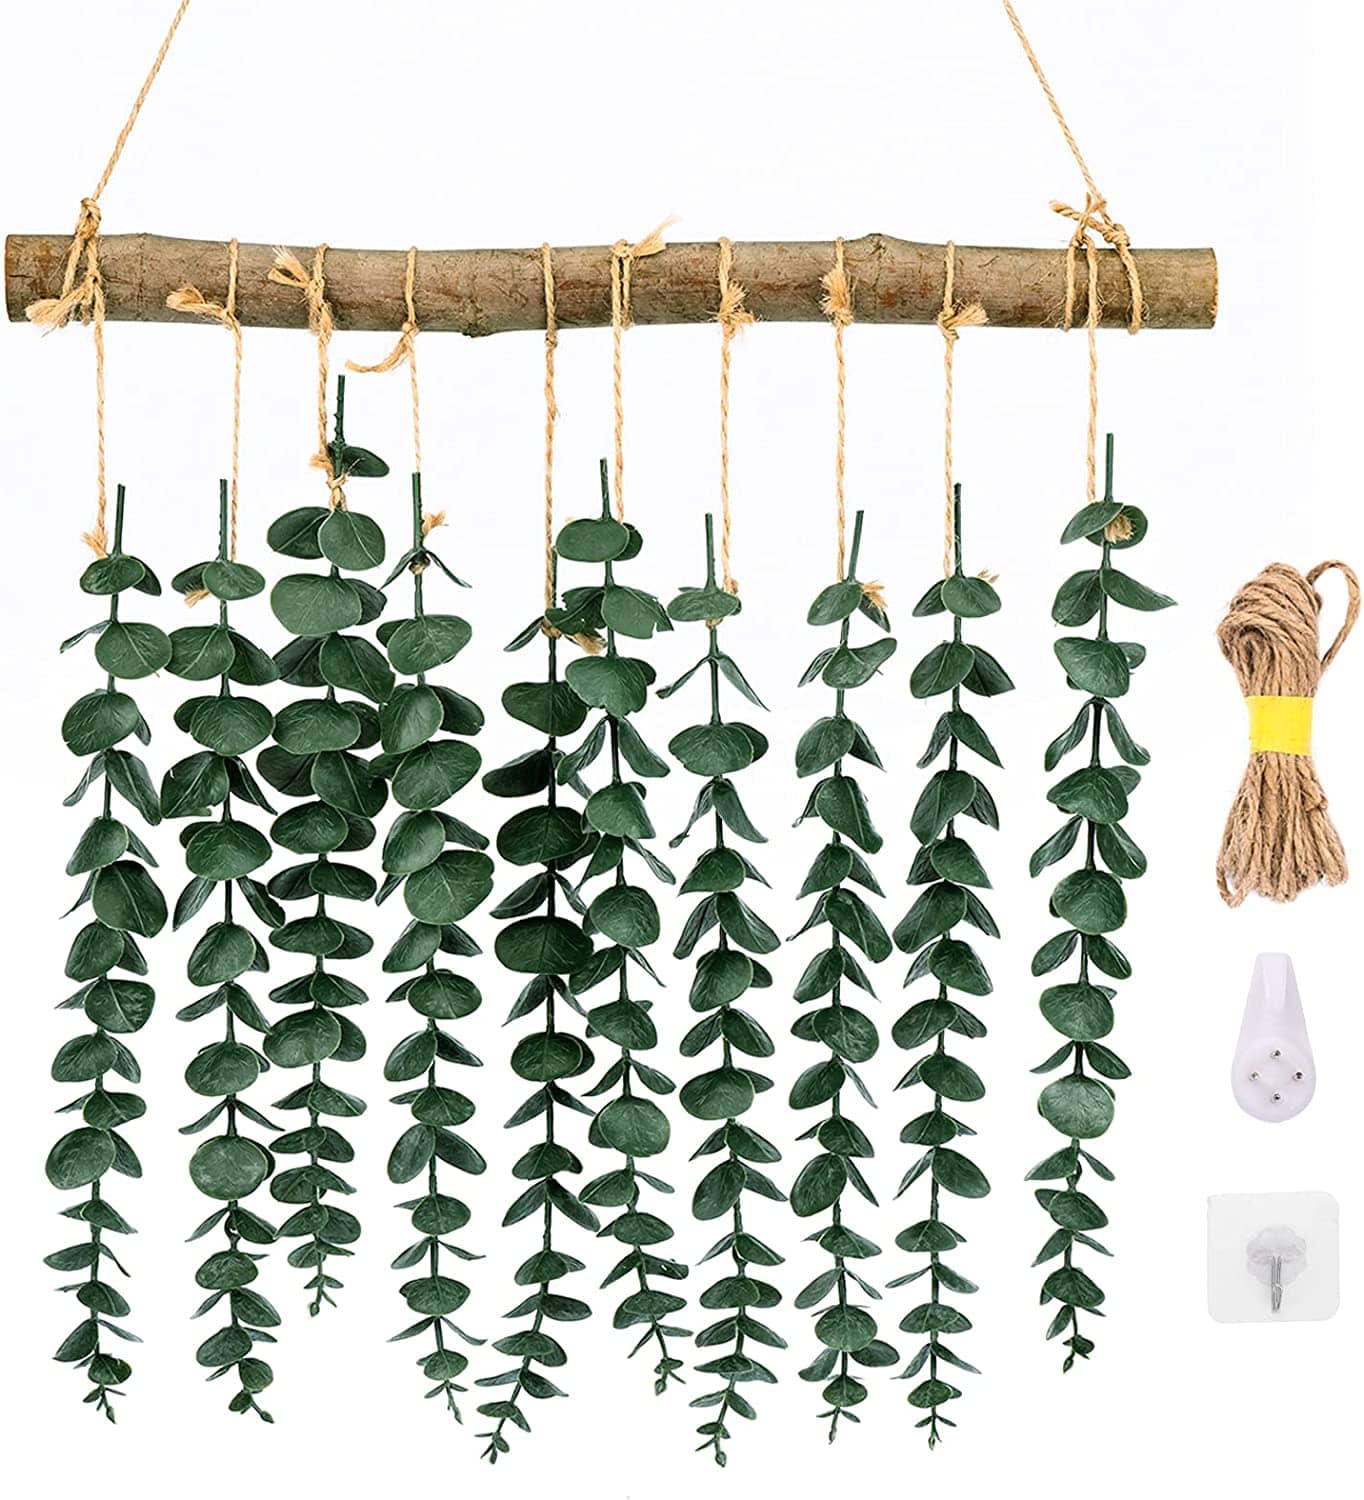 Artificial Eucalyptus Wall Hanging Decor, Greenery Plants for Boho Home, Bedroom, Bathroom, Nursery, Living Room, Farmhouse Rustic, Fake Eucalyptus Decorations with Wooden Stick（Shipment from FBA) - HomeRelaxOfficial